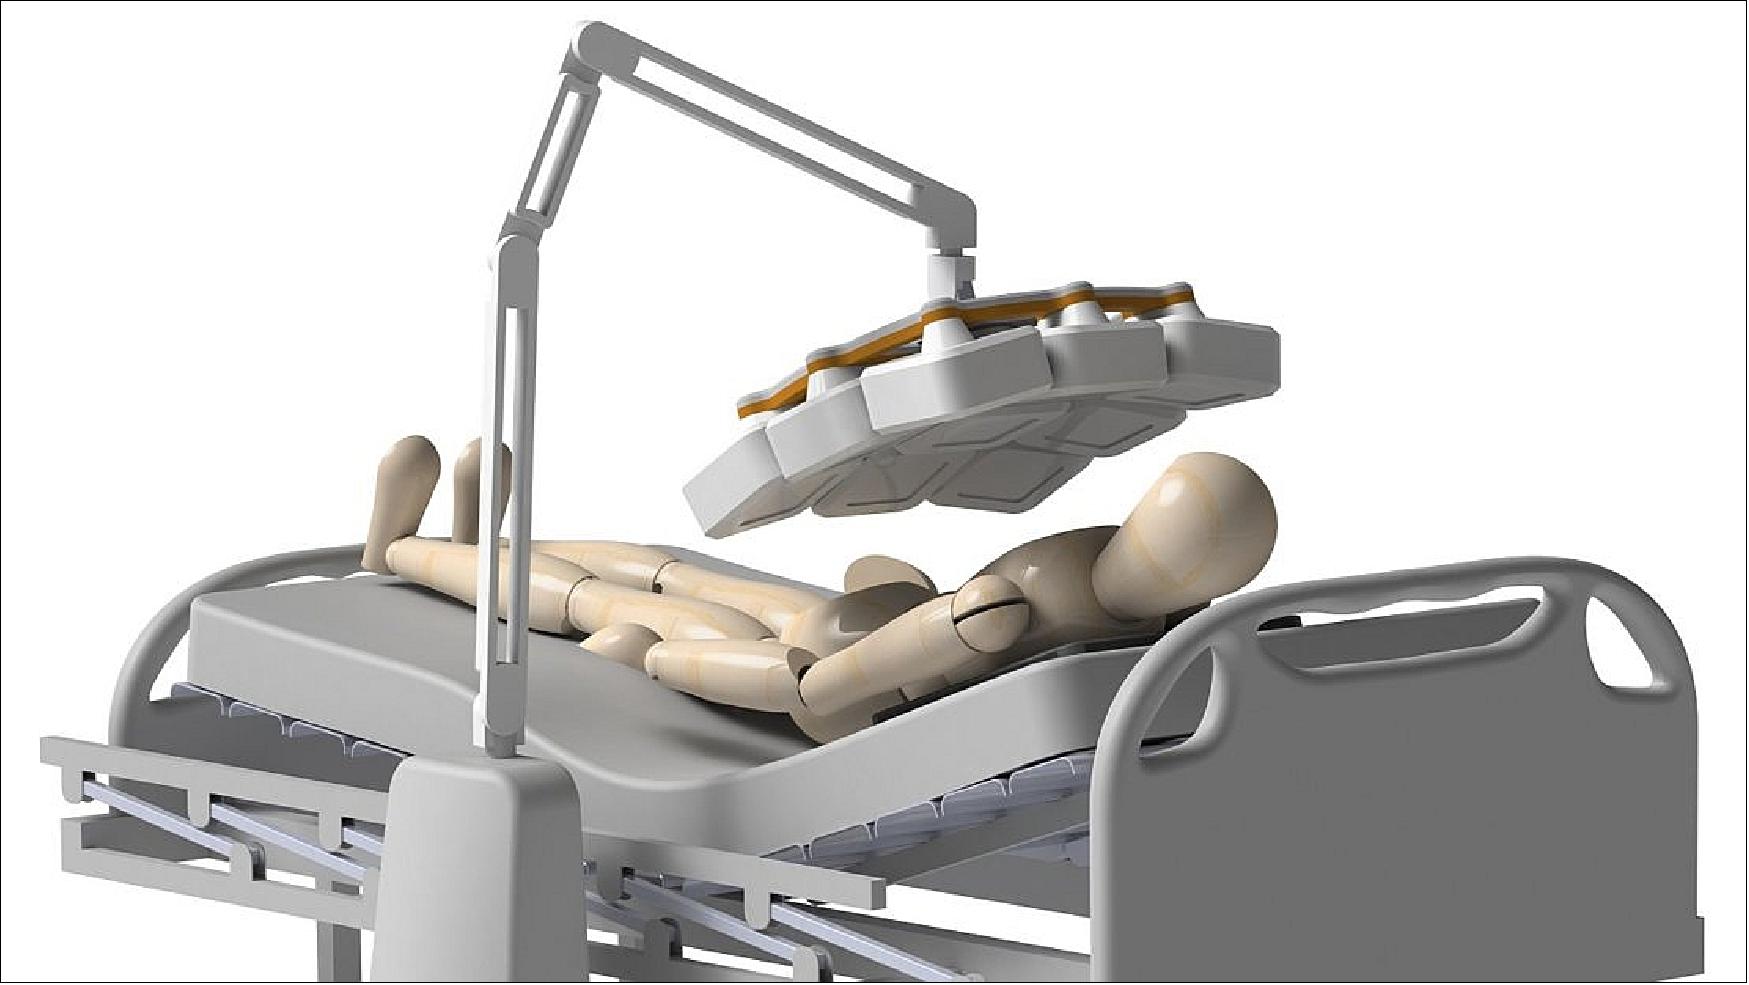 Figure 59: Concept system of a 3D mobile X-ray machine (image credit: Adaptix Imaging)